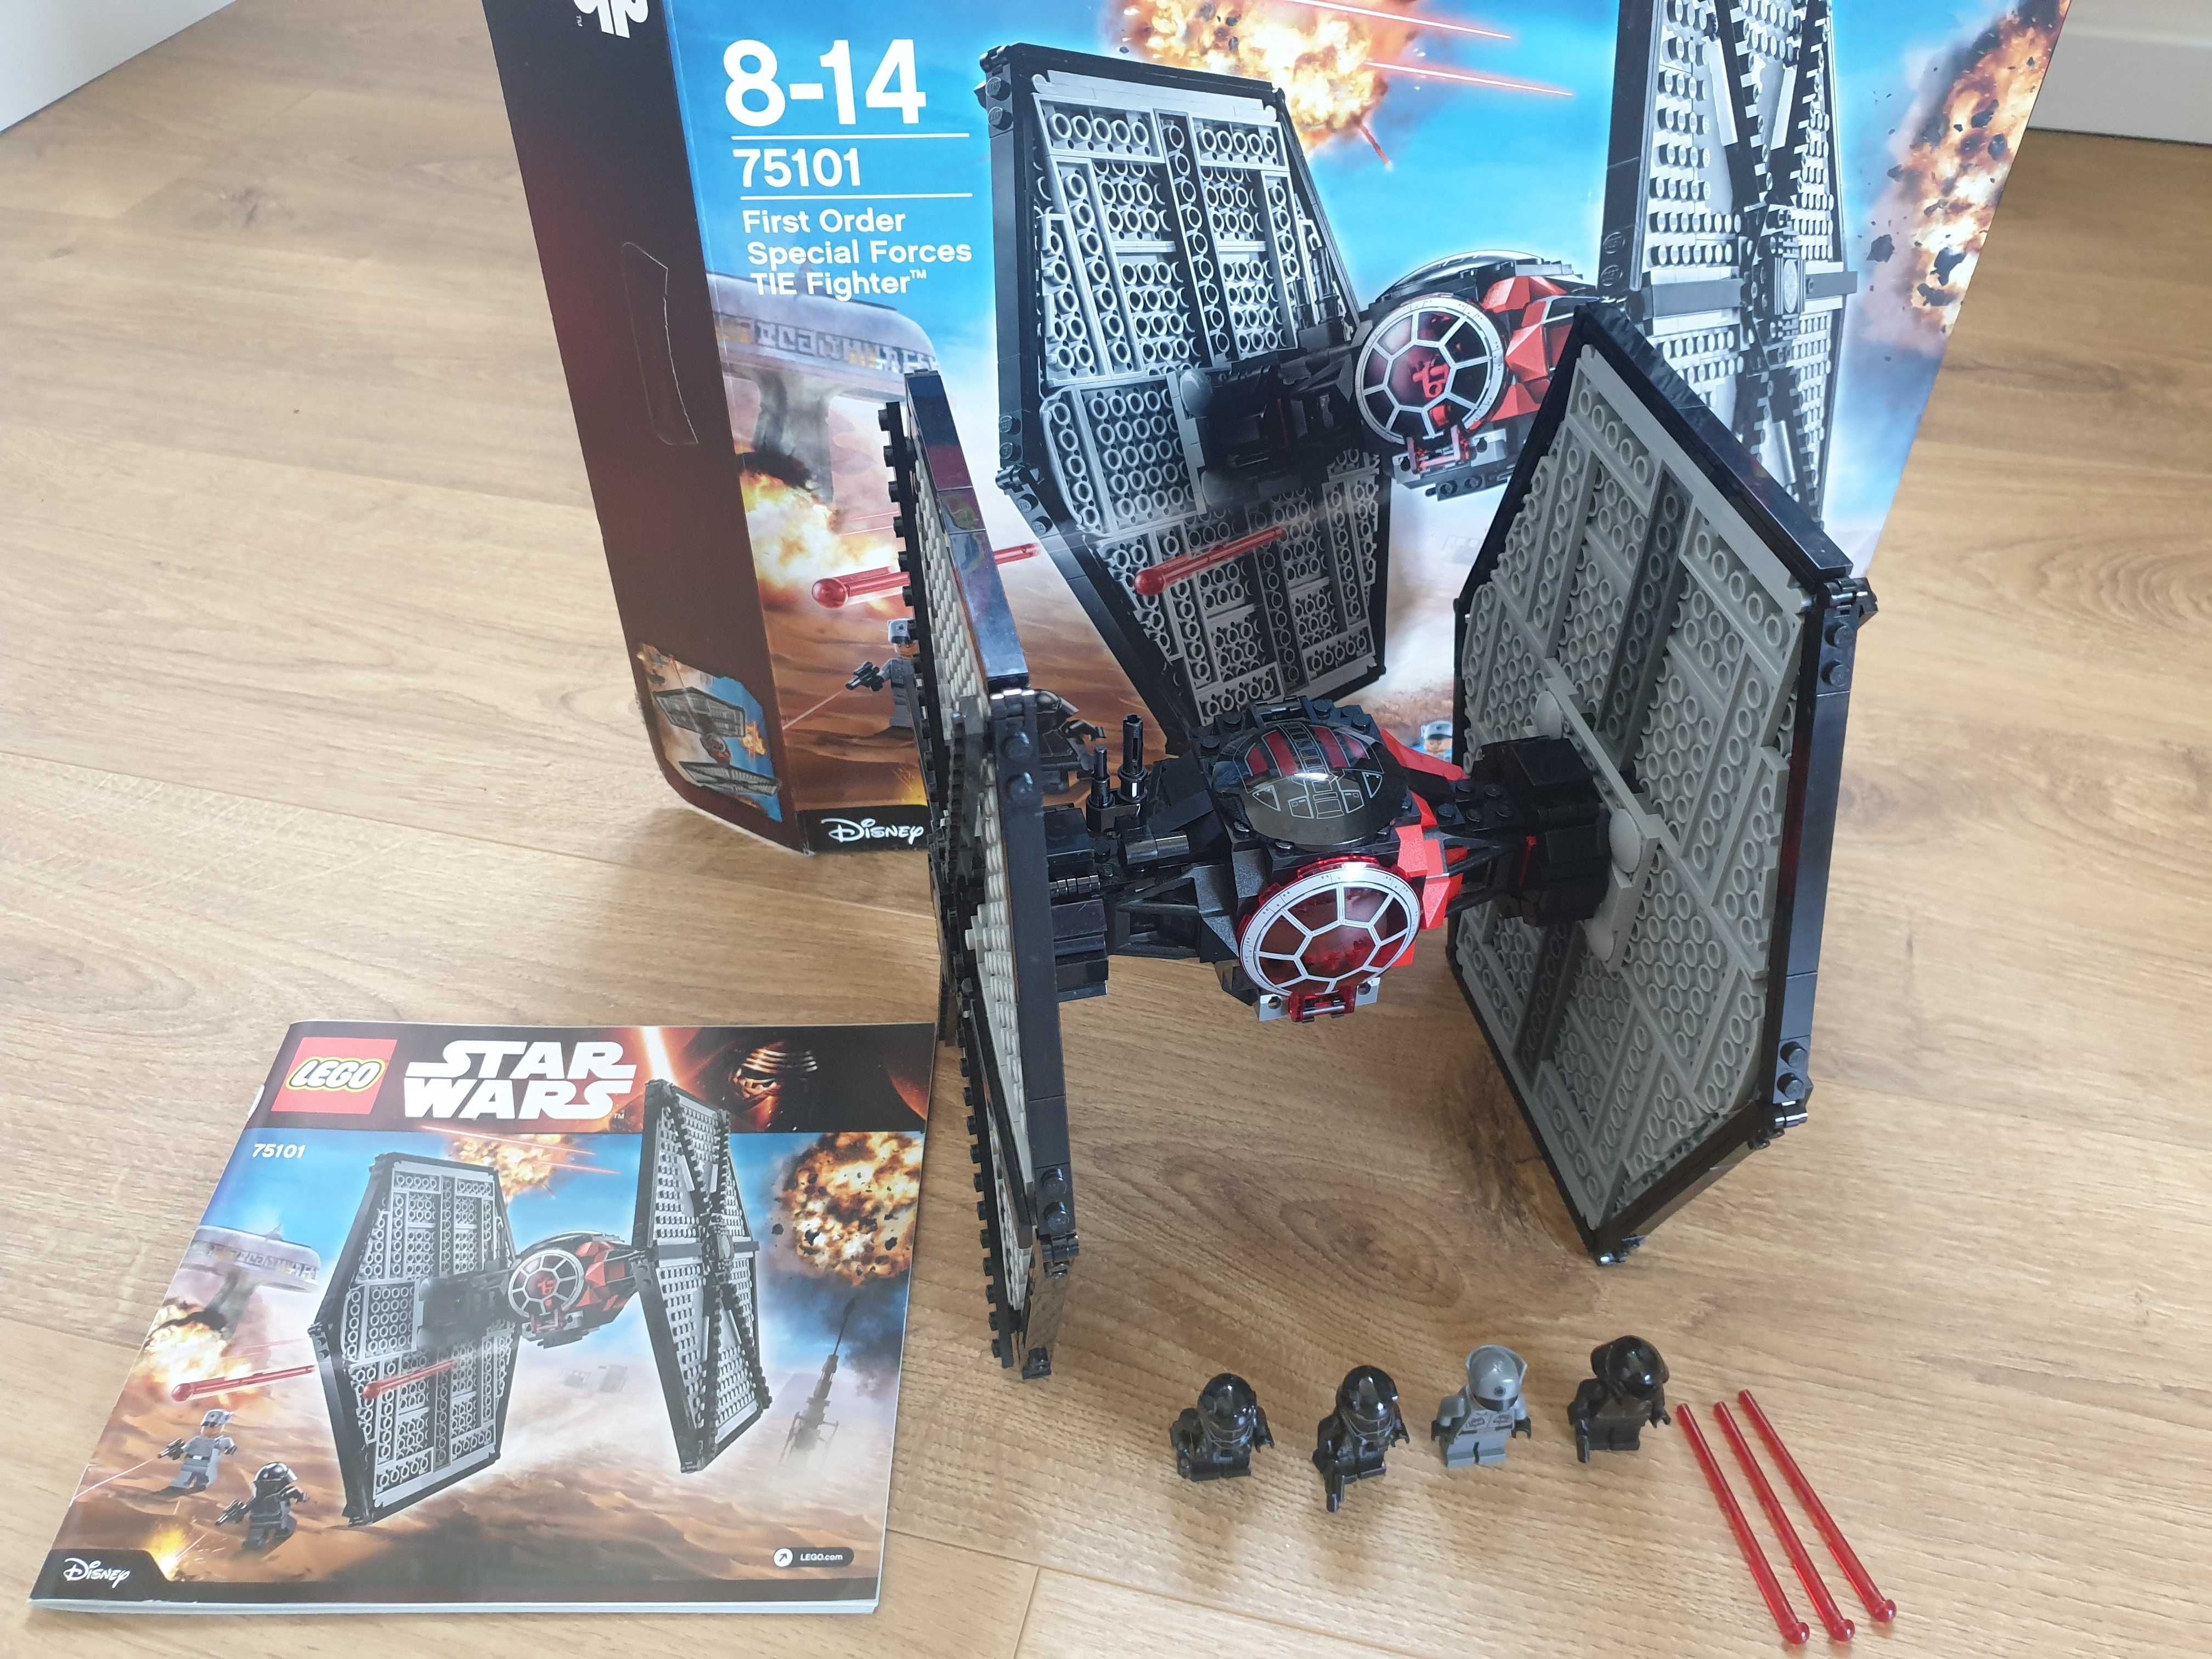 Lego Star Wars 75101 - First Order Special Forces TIE Fighter